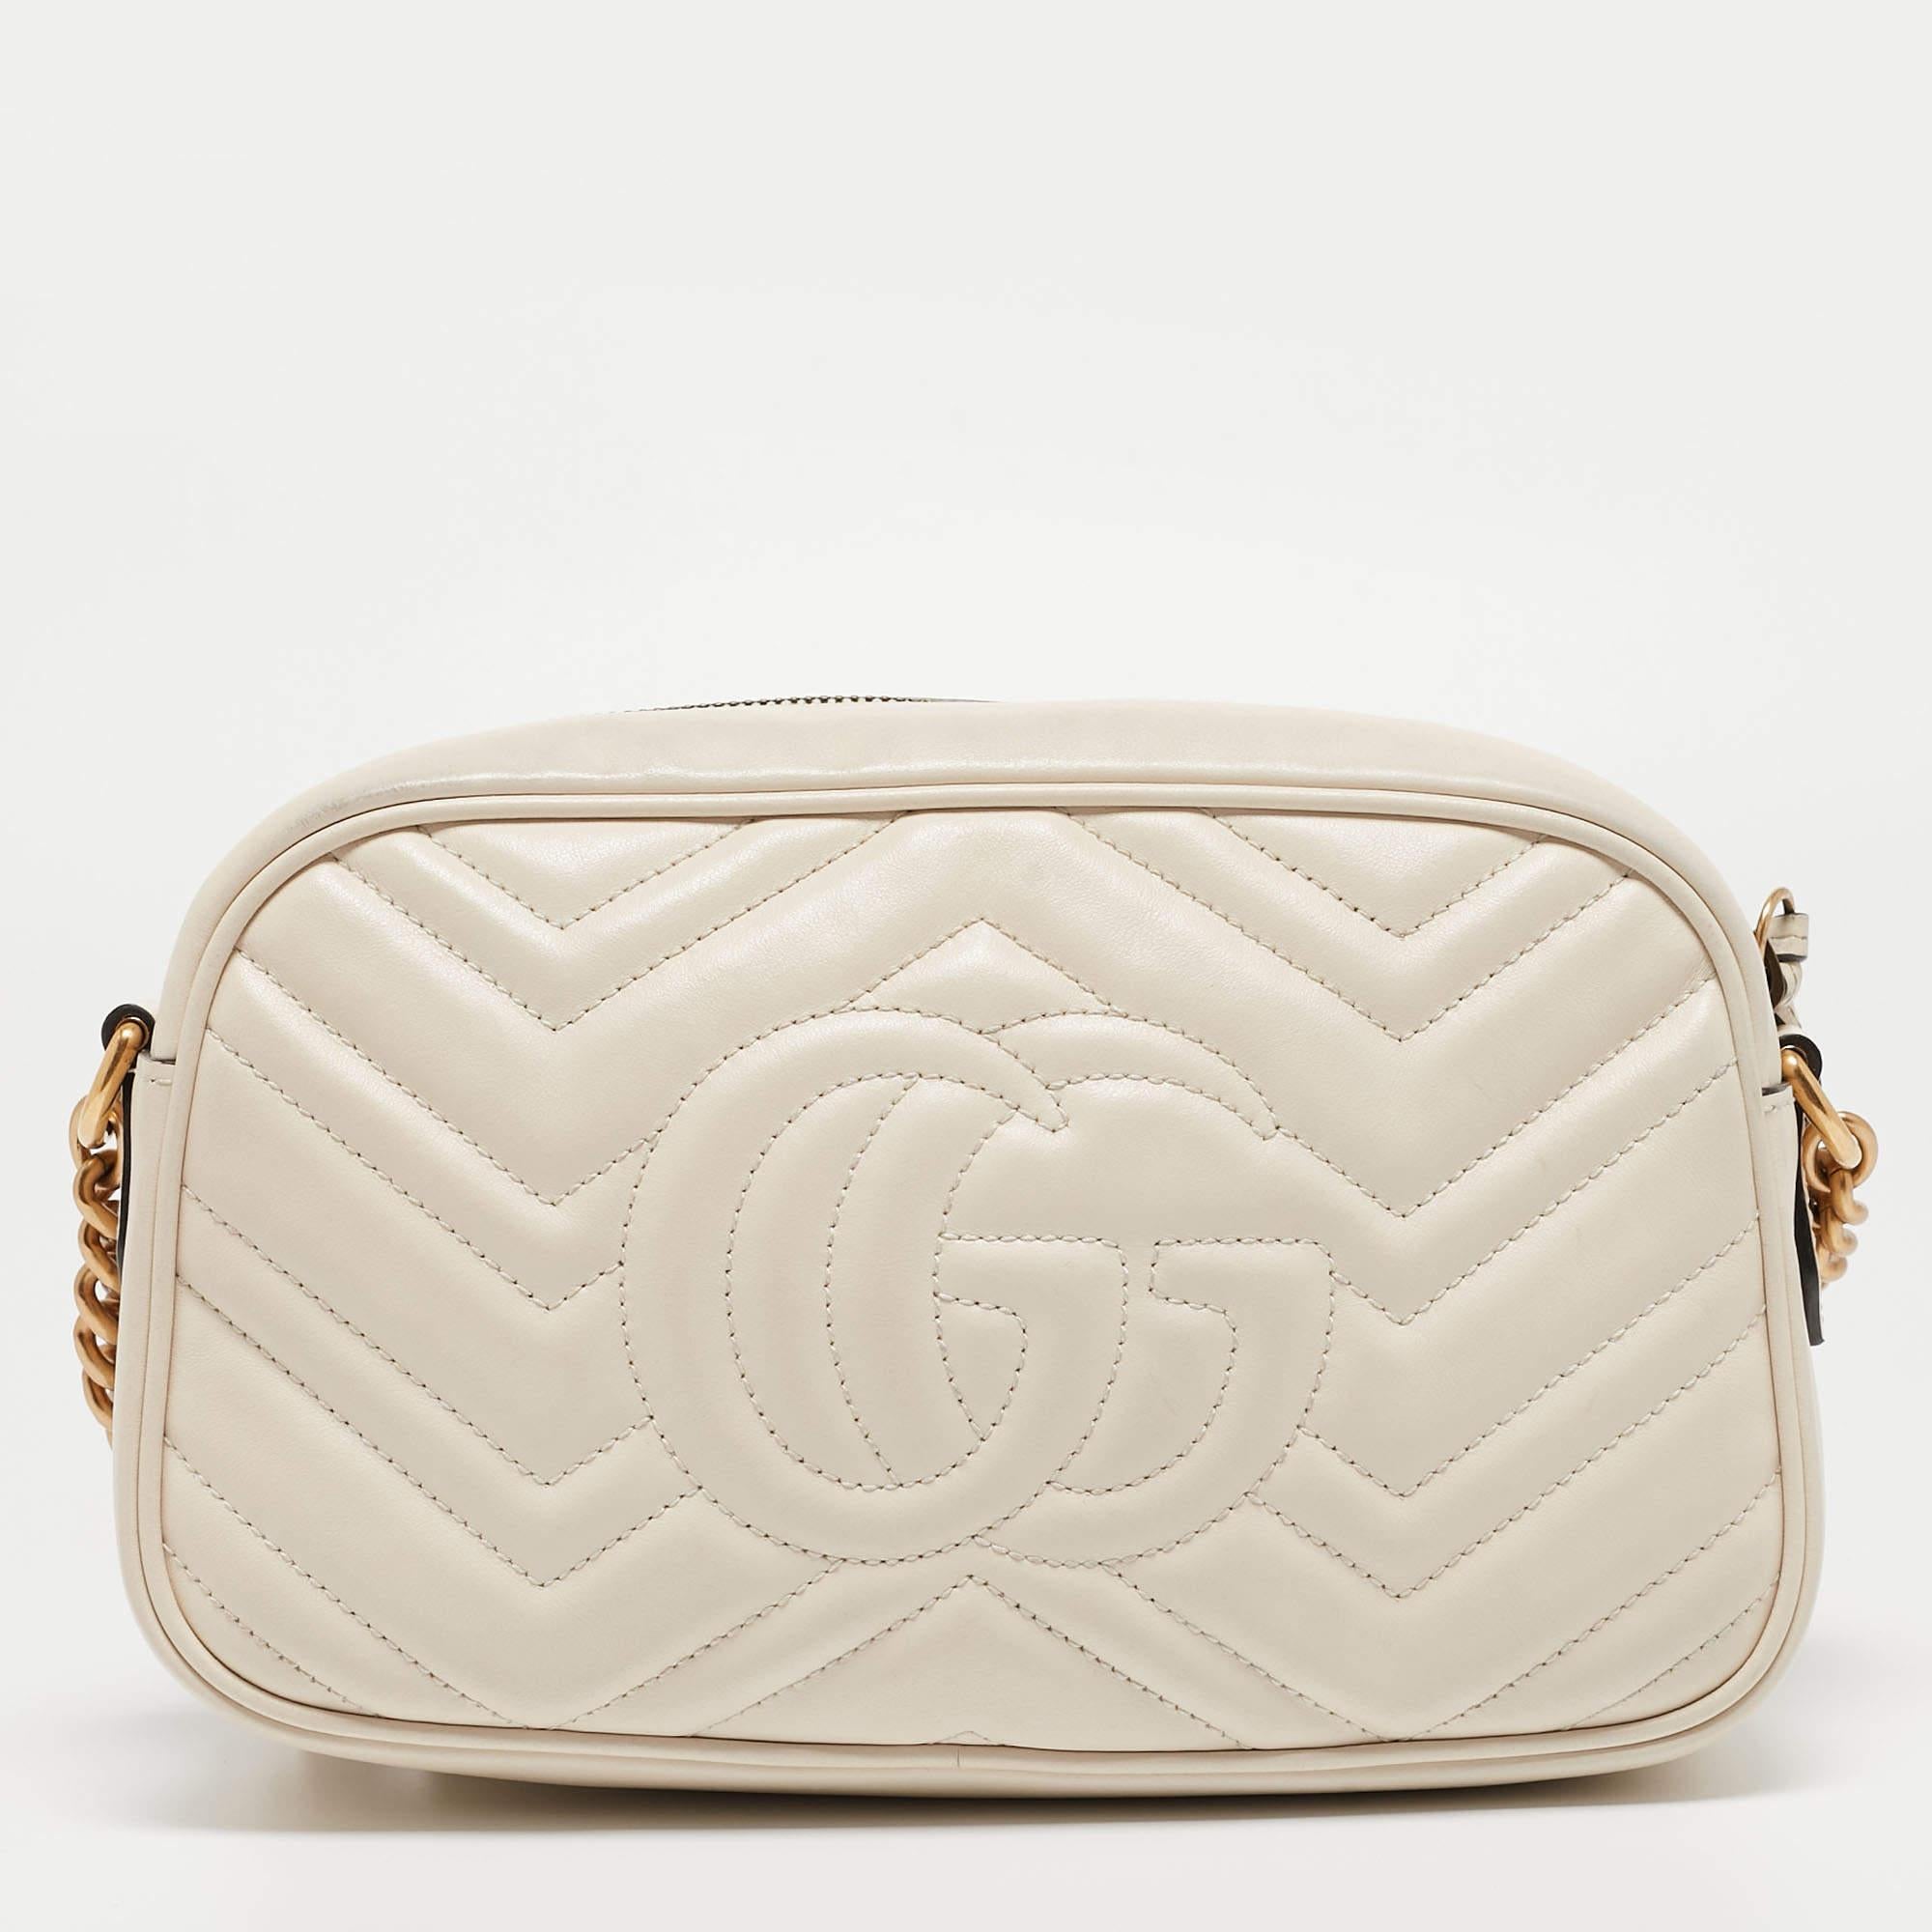 Innovative and sophisticated, this Gucci Marmont shoulder bag evokes a sense of classic glamour. Finely crafted from matelassé leather, it gets a luxe update with a 'GG' motif on the front and features an Alcantara-lined interior. The chain-leather